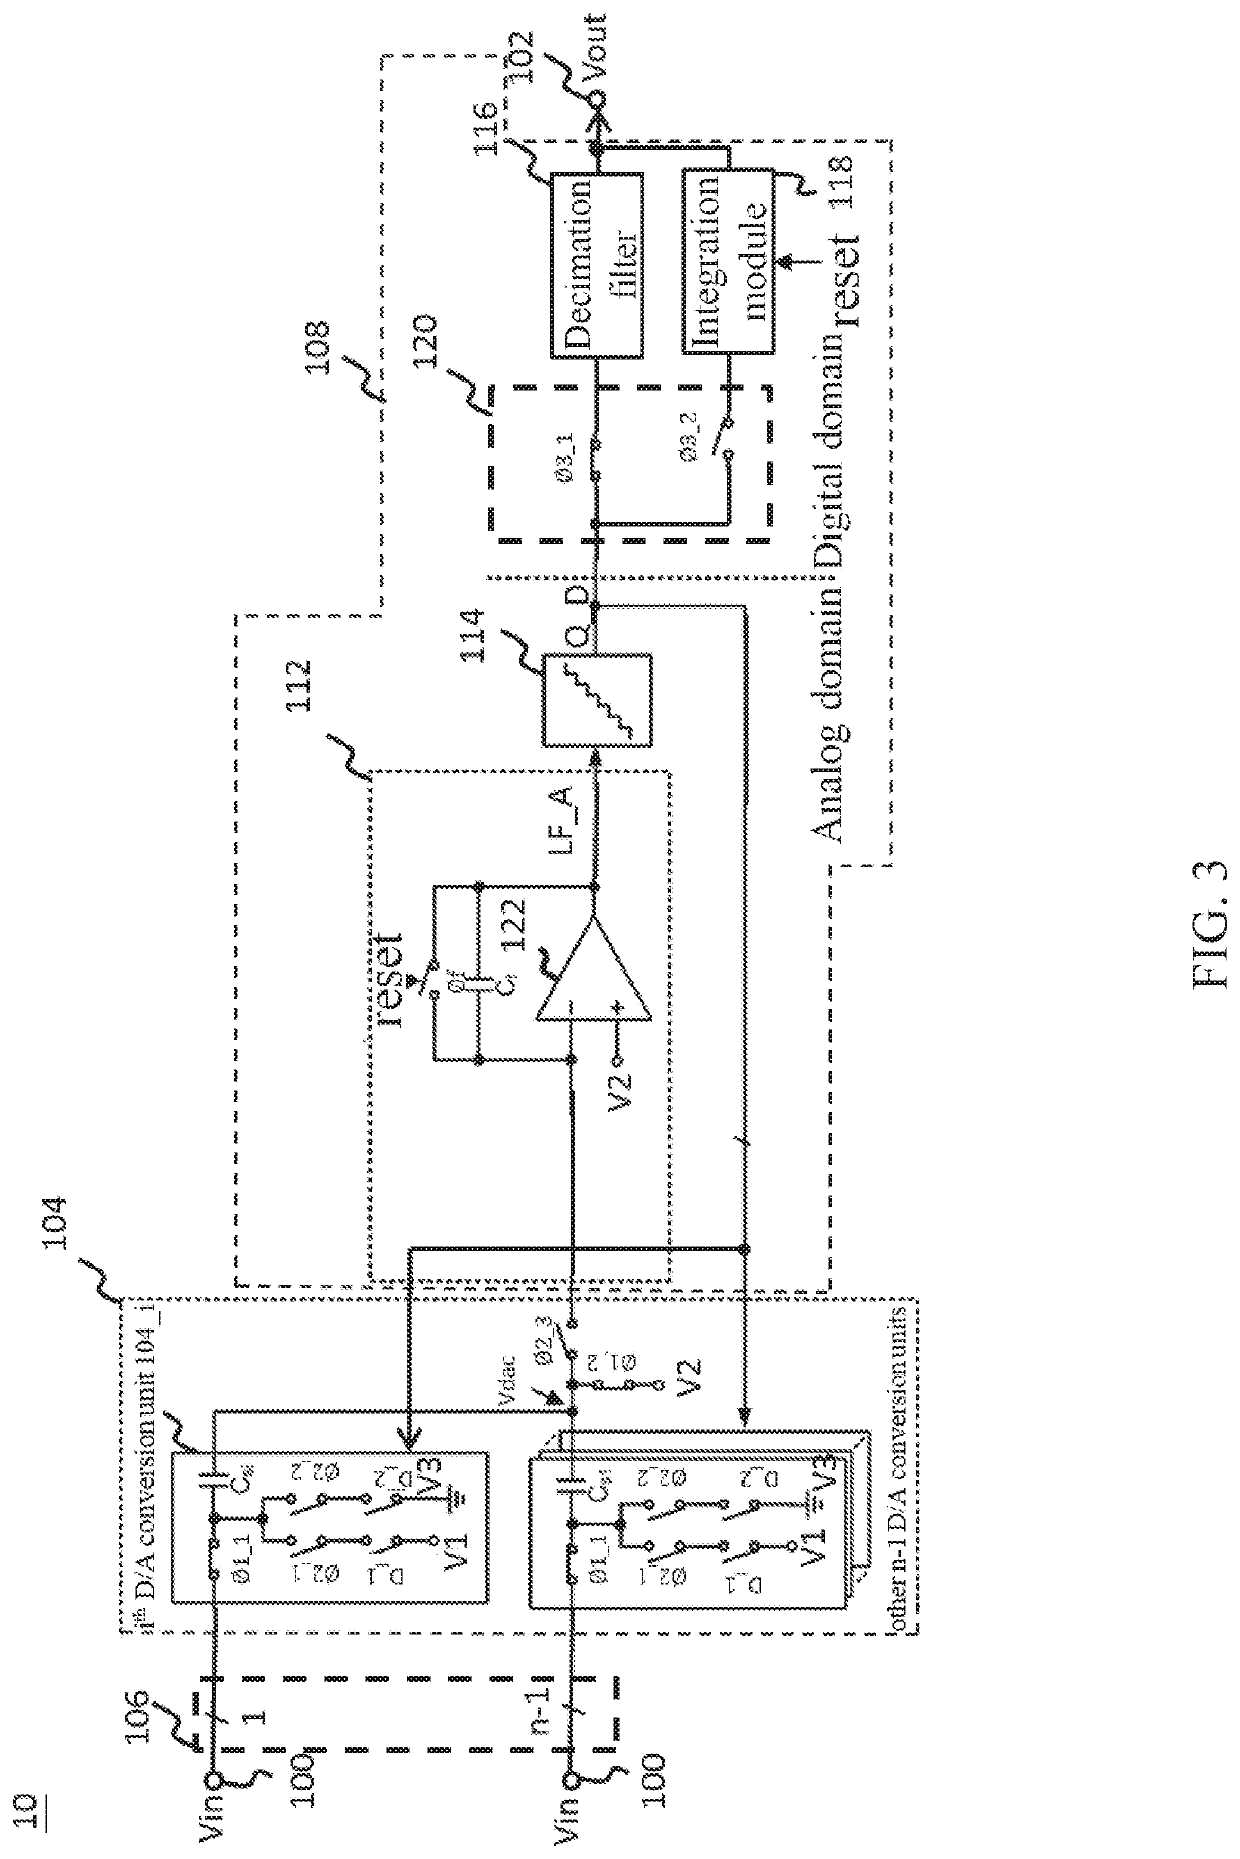 Analog-to-digital converter and associated chip